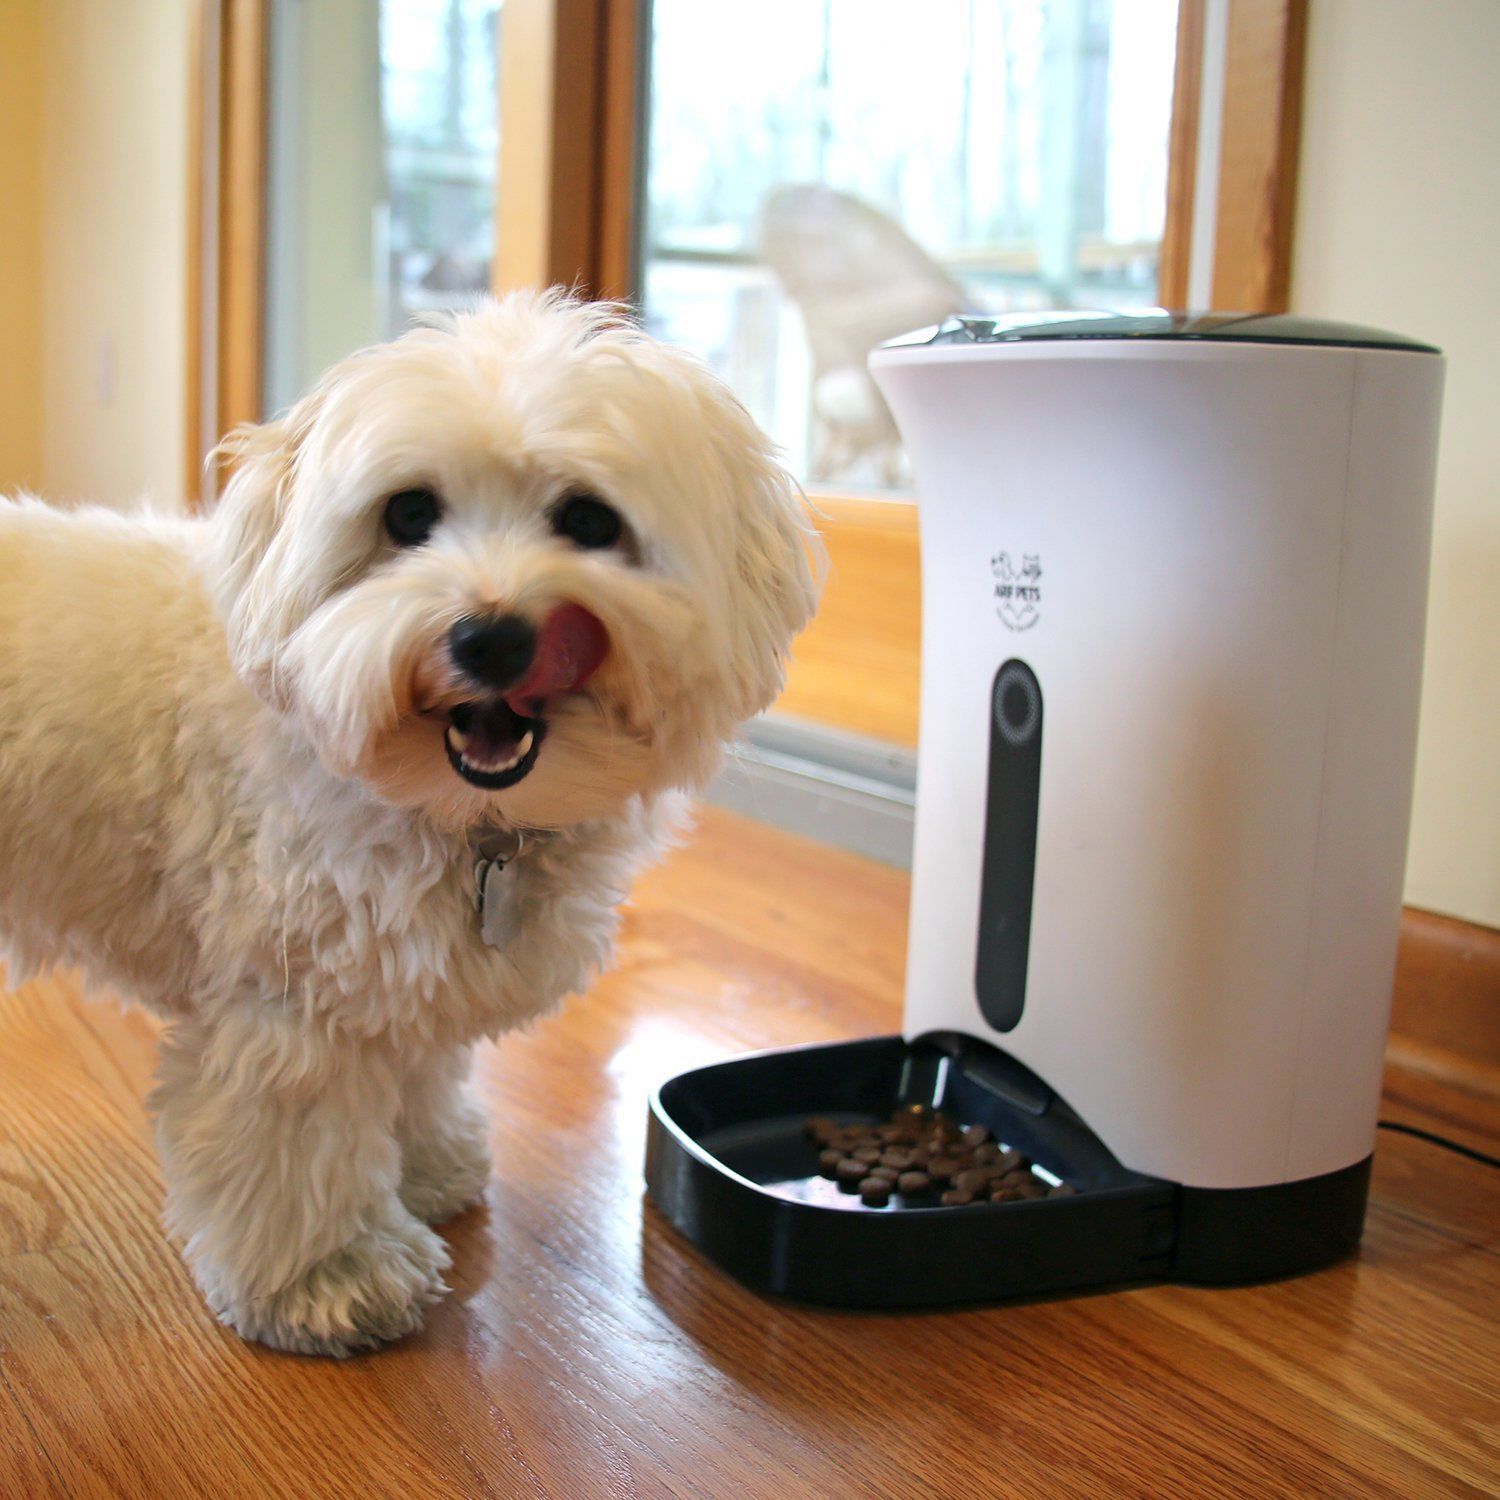 Skymall: Arf Pets Automatic Pet Feeder Food Dispenser for Dogs & Cats